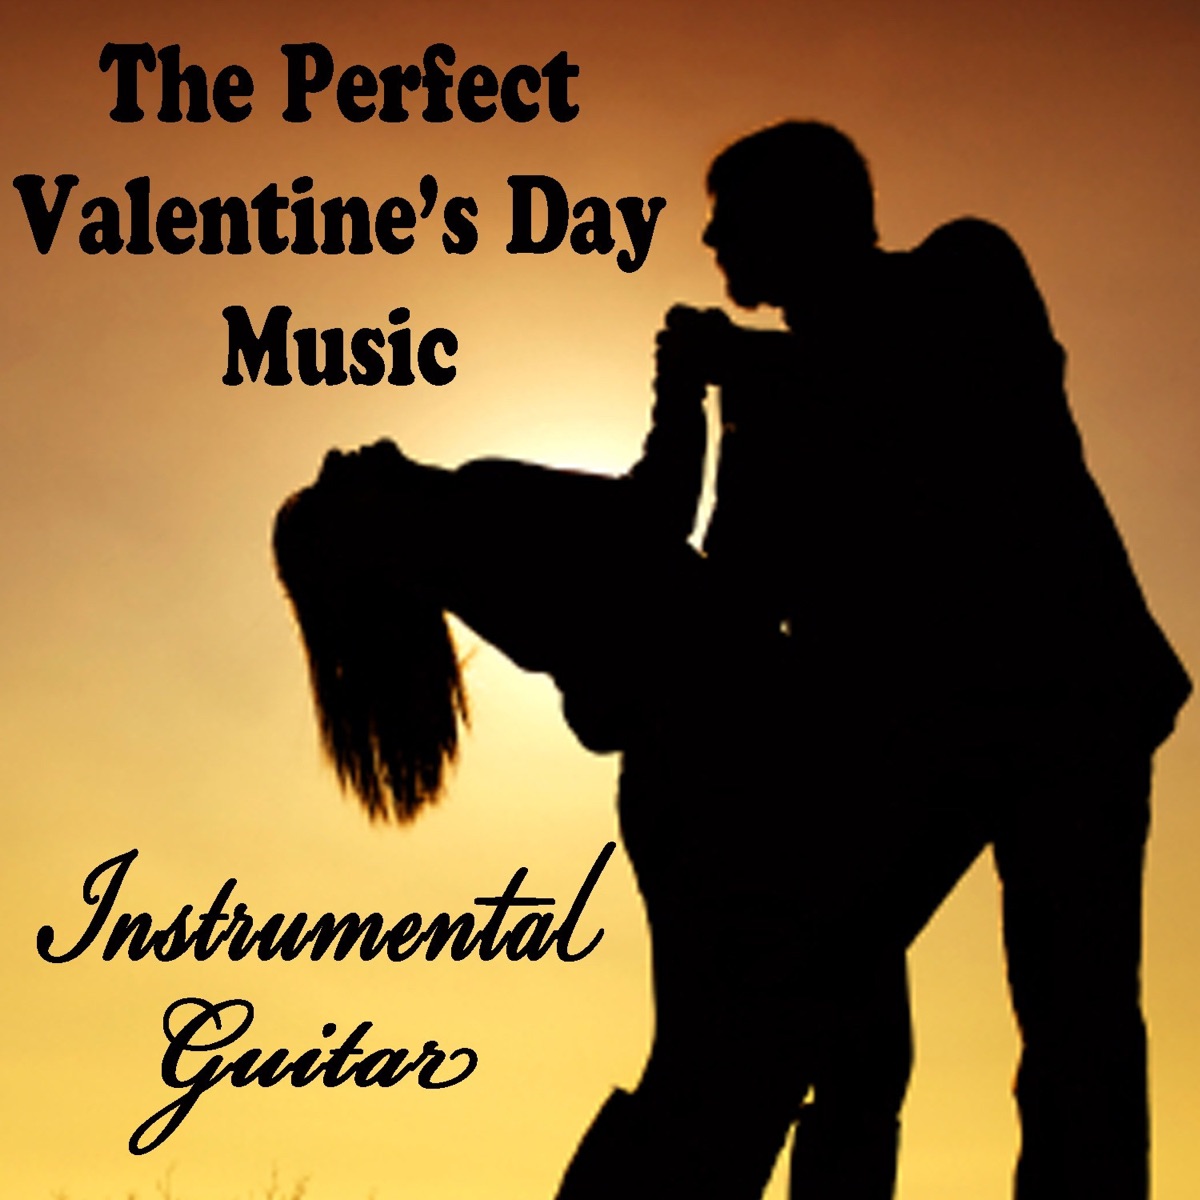 The Perfect Valentine's Day Music: Instrumental Guitar - Album by The  O'Neill Brothers Group - Apple Music